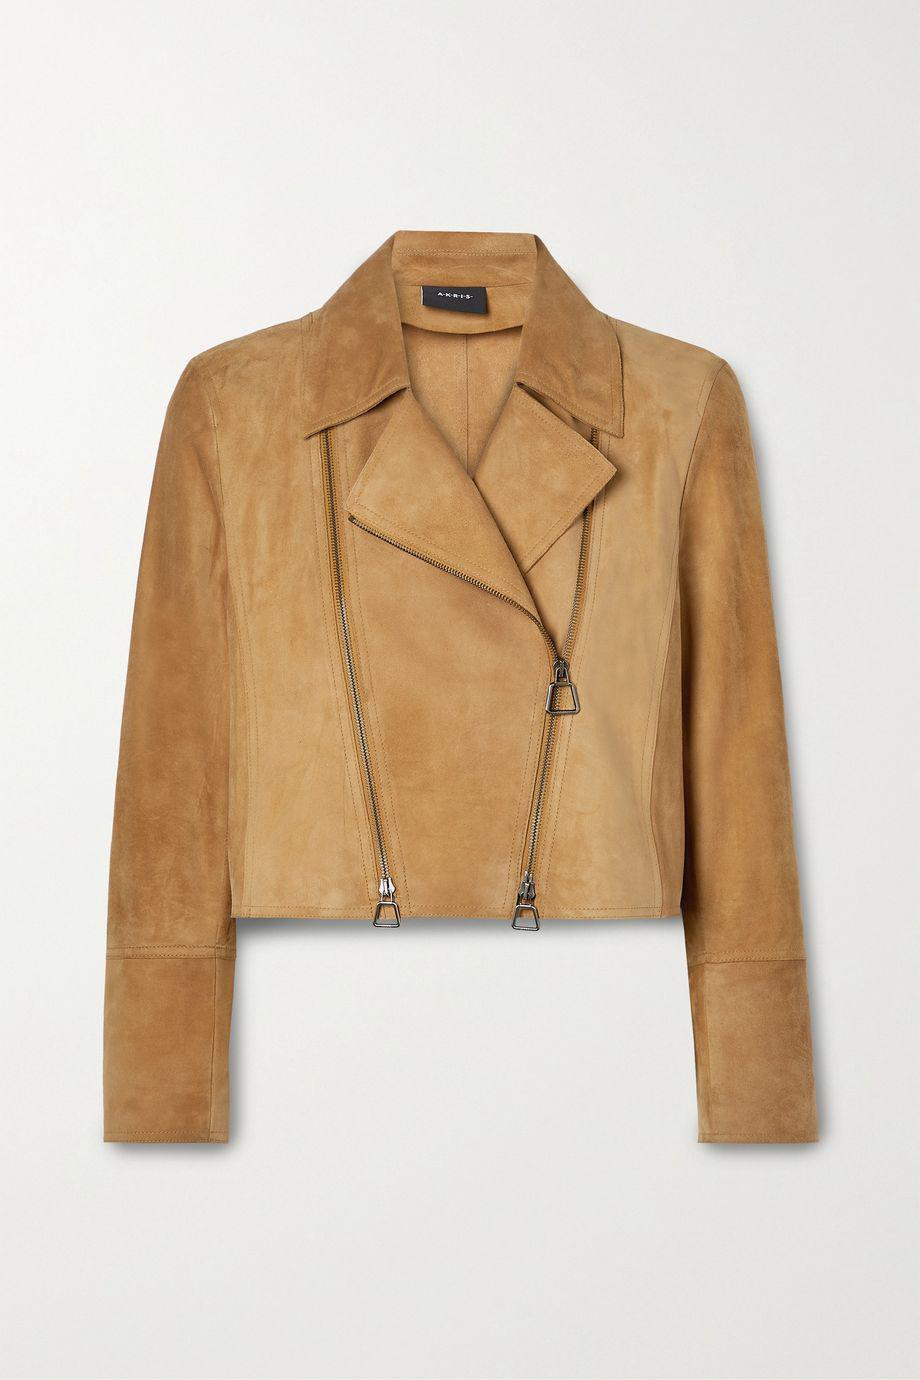 Clary cropped suede biker jacket by AKRIS